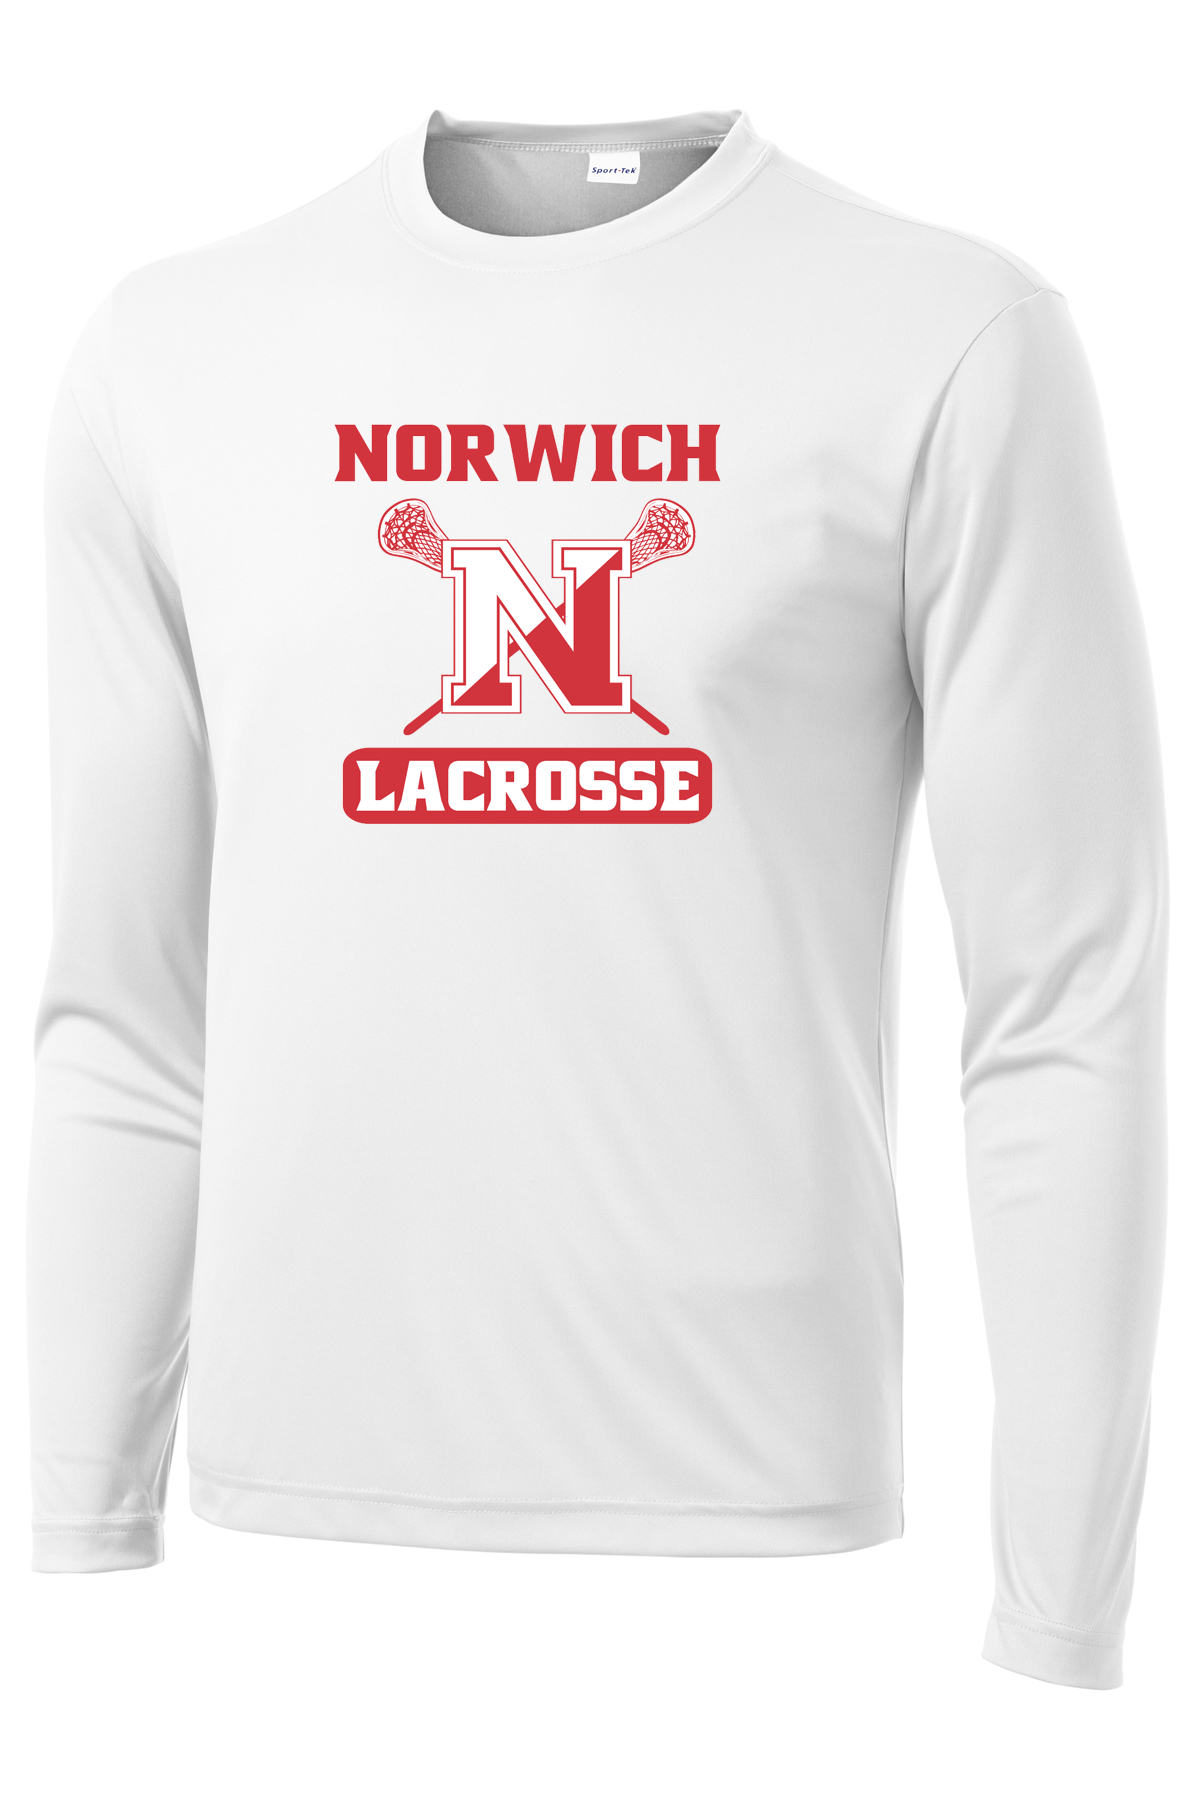 Norwich Youth Lacrosse White Long Sleeve Performance Shirt